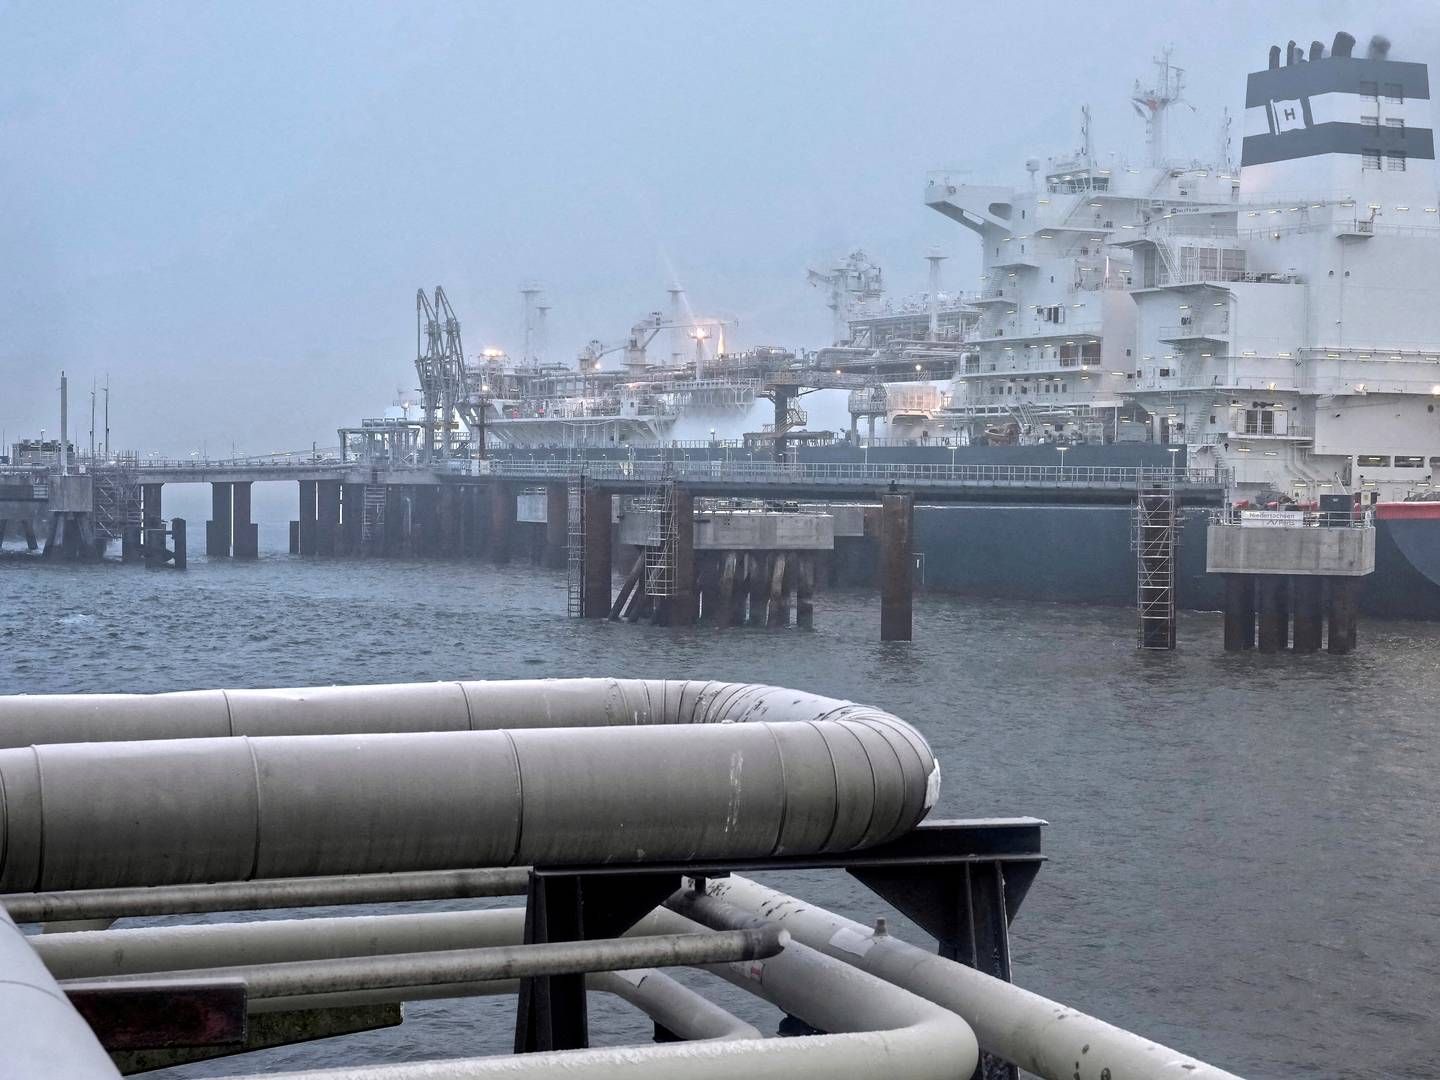 An FSRU LNG platform in the German Port of Wilhelmshaven. The ship is not among the three financed by the German government. | Photo: Pool/Reuters/Ritzau Scanpix/REUTERS / X80003